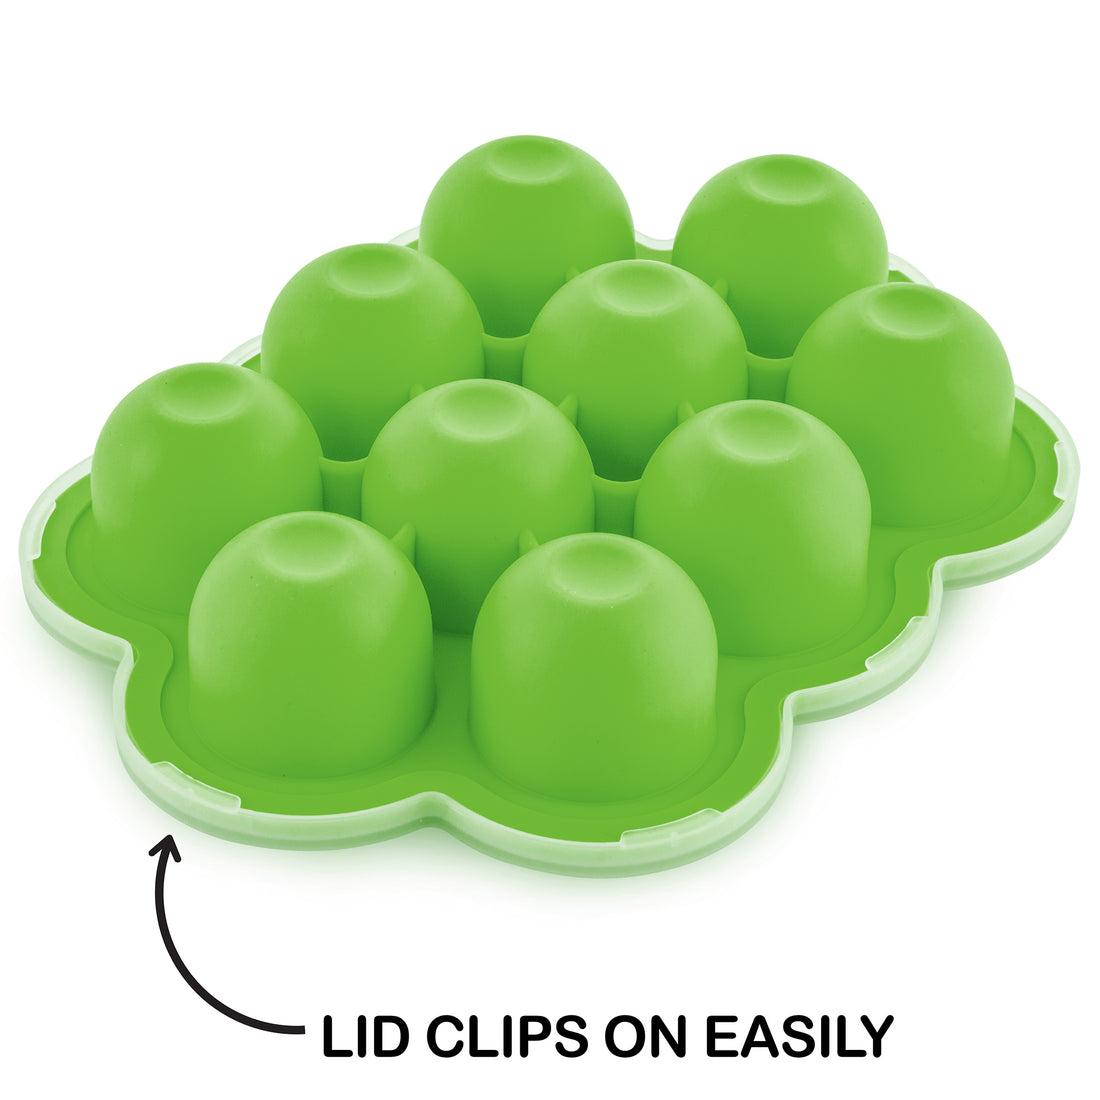 WEESPROUT Silicone Baby Food Freezer Tray with Clip-on Lid